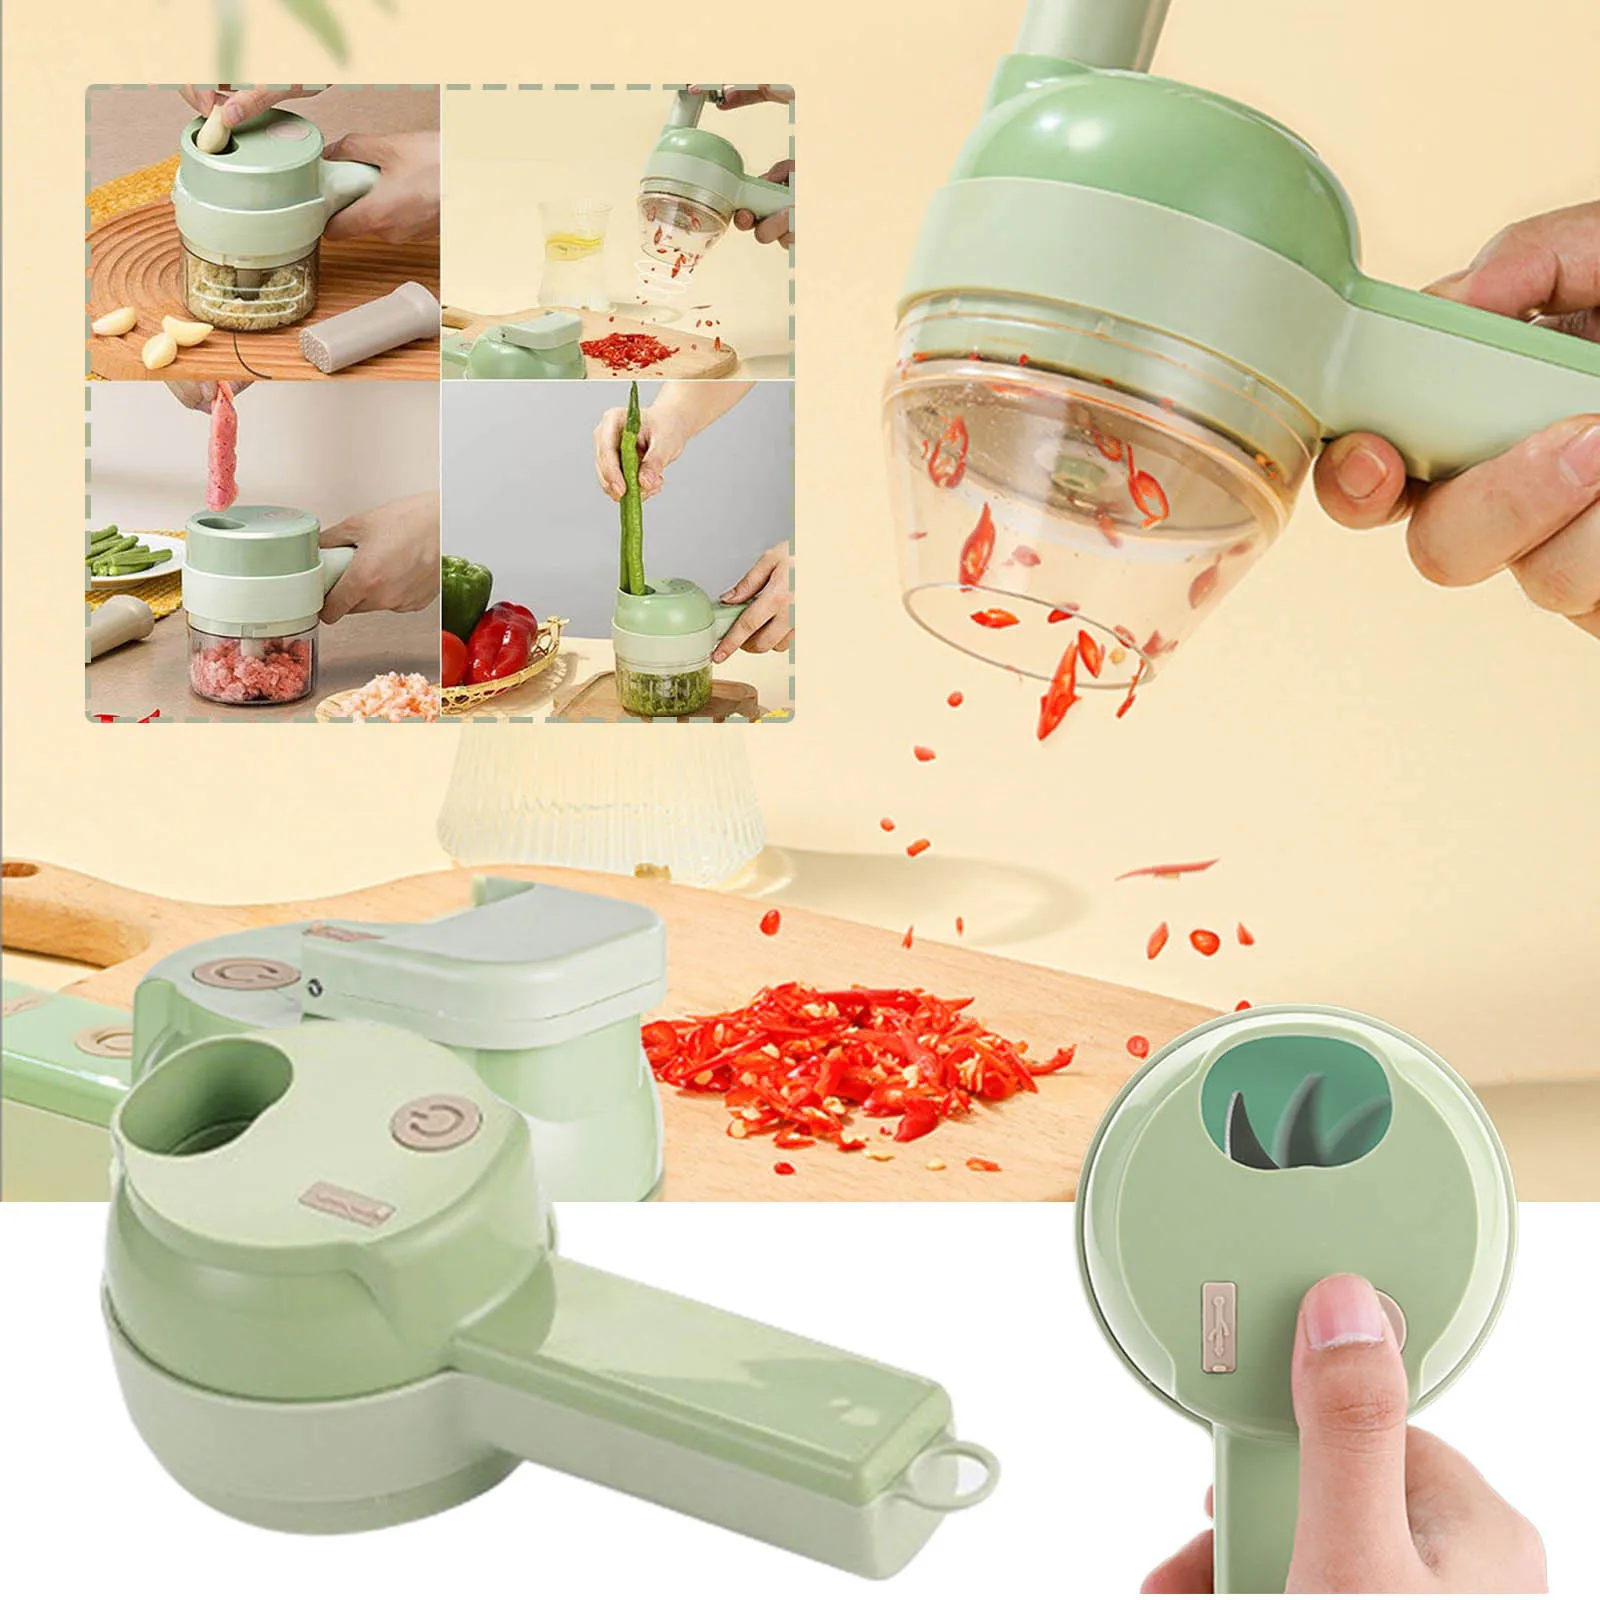 Portable 4 in 1 Electric Vegetable Slicer Set, Wireless Food